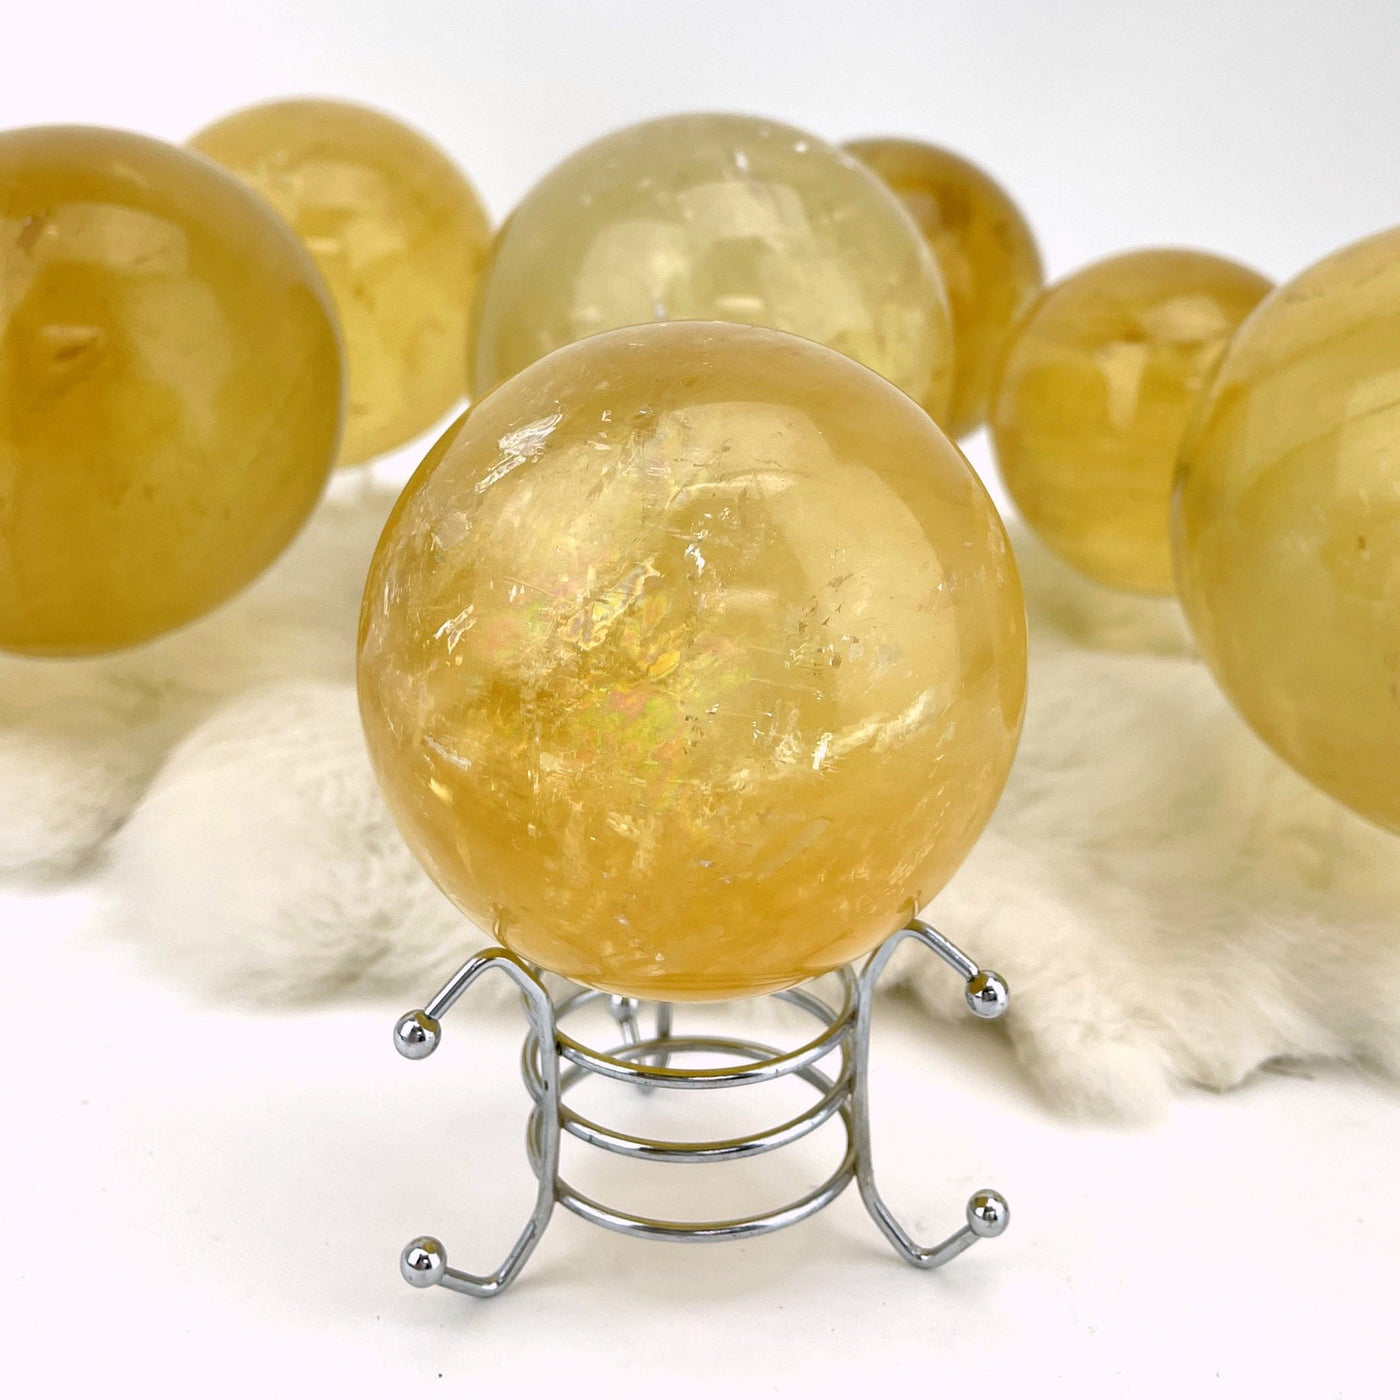 up close shot of Honey Calcite Polished Sphere with others in the background